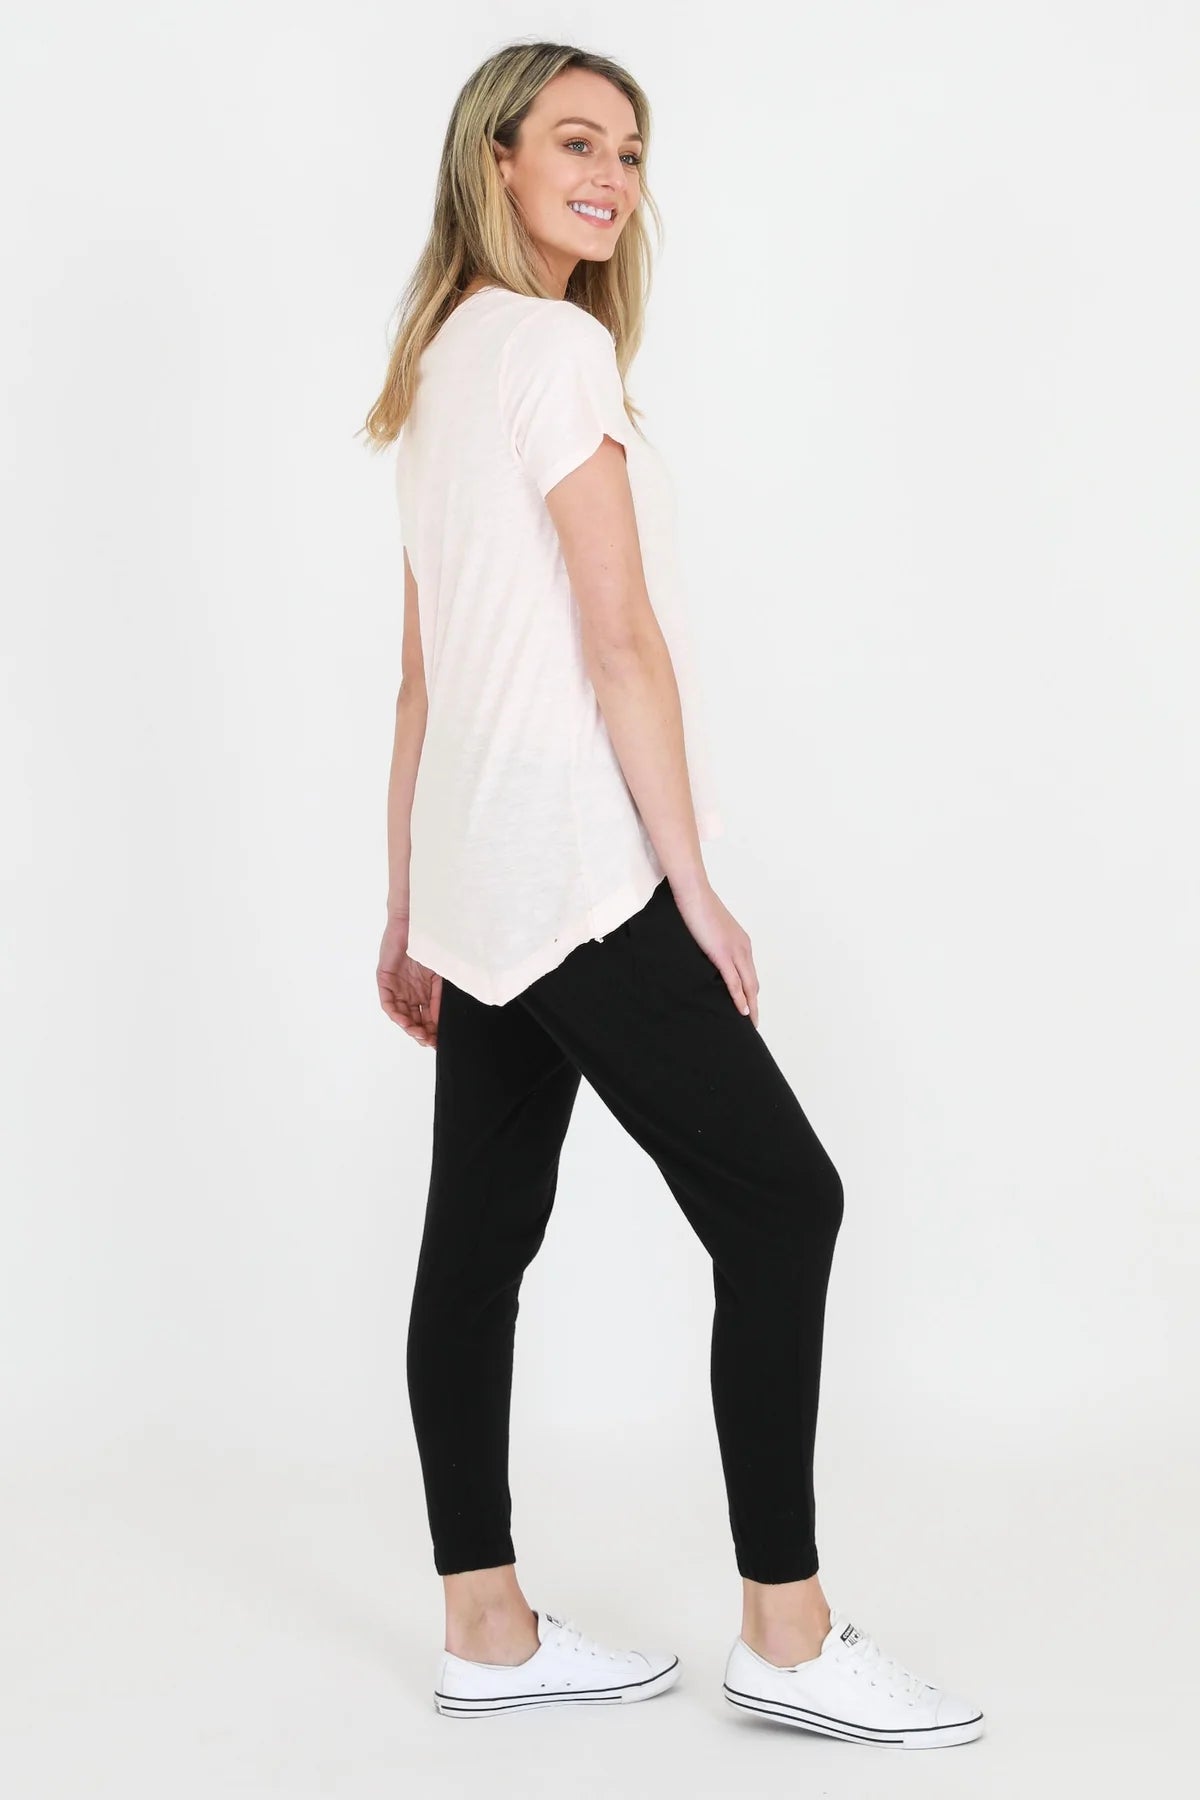 3rd Story - Thornton Tee in Blush Marle